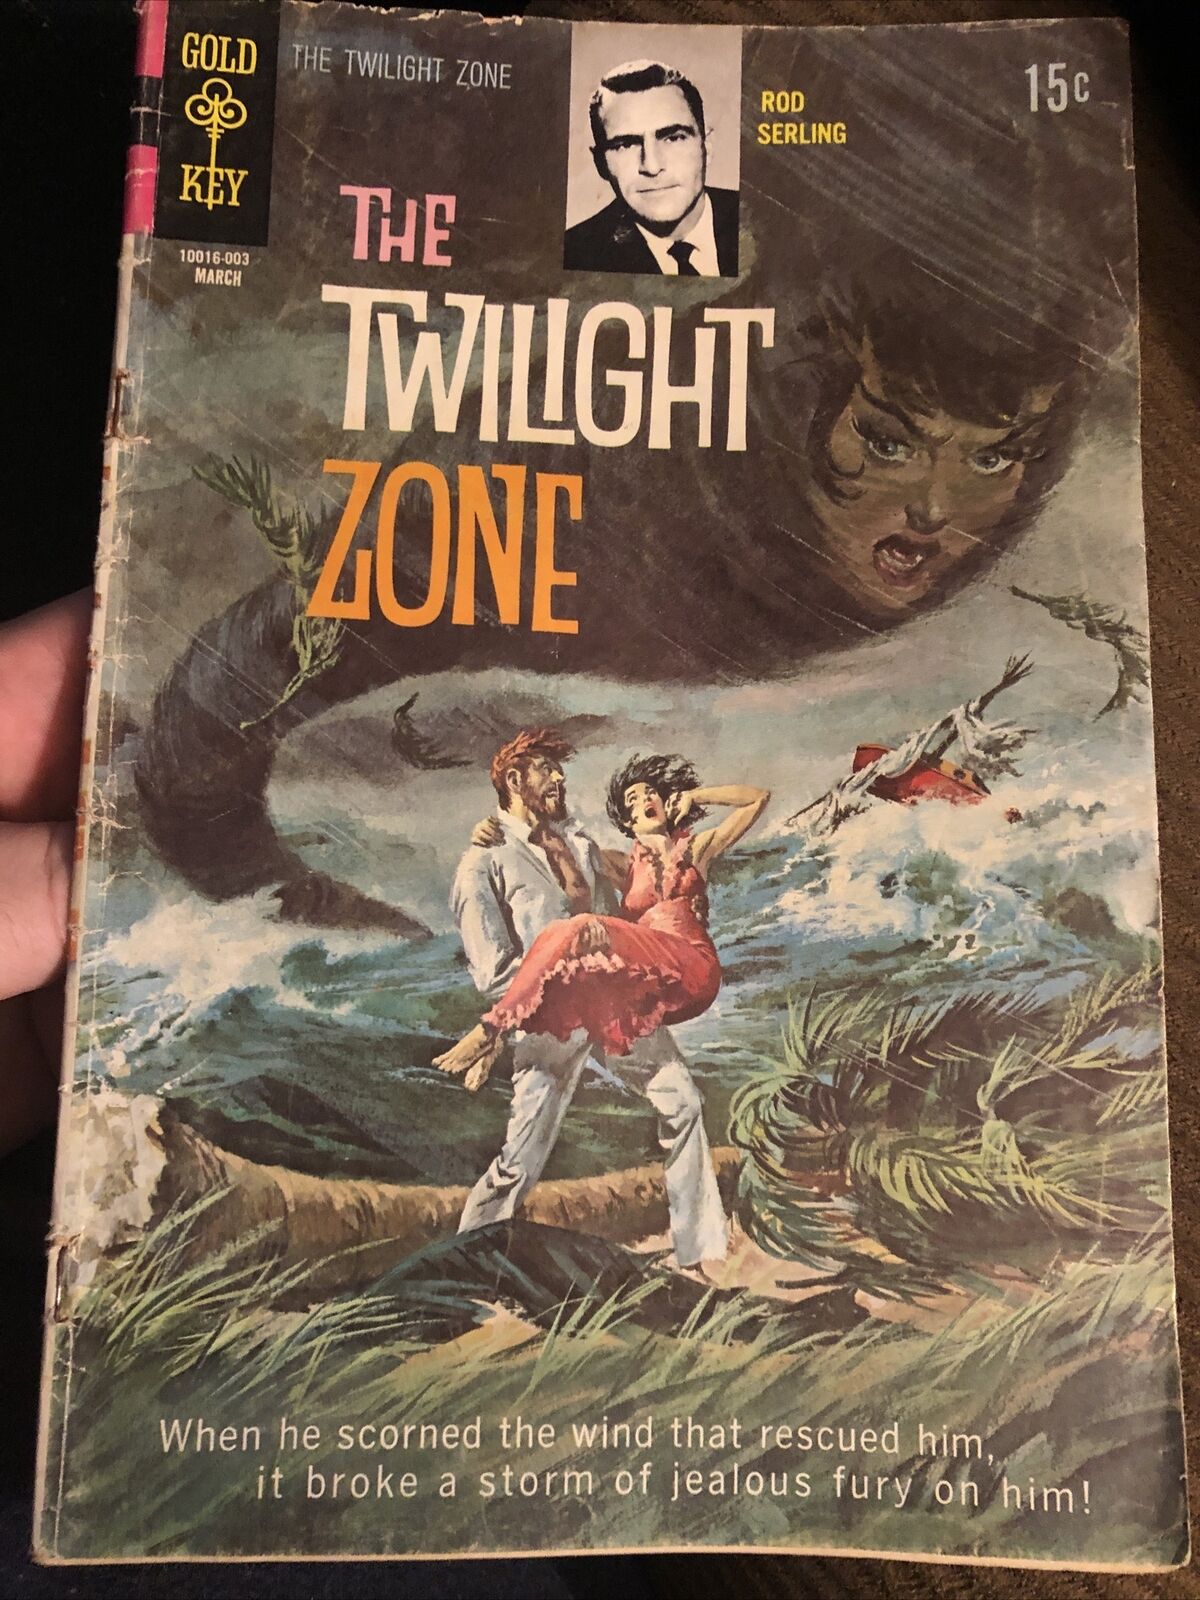 The Twilight Zone #32 March 1970. Vintage Gold Key Comic Book. Rod Sterling